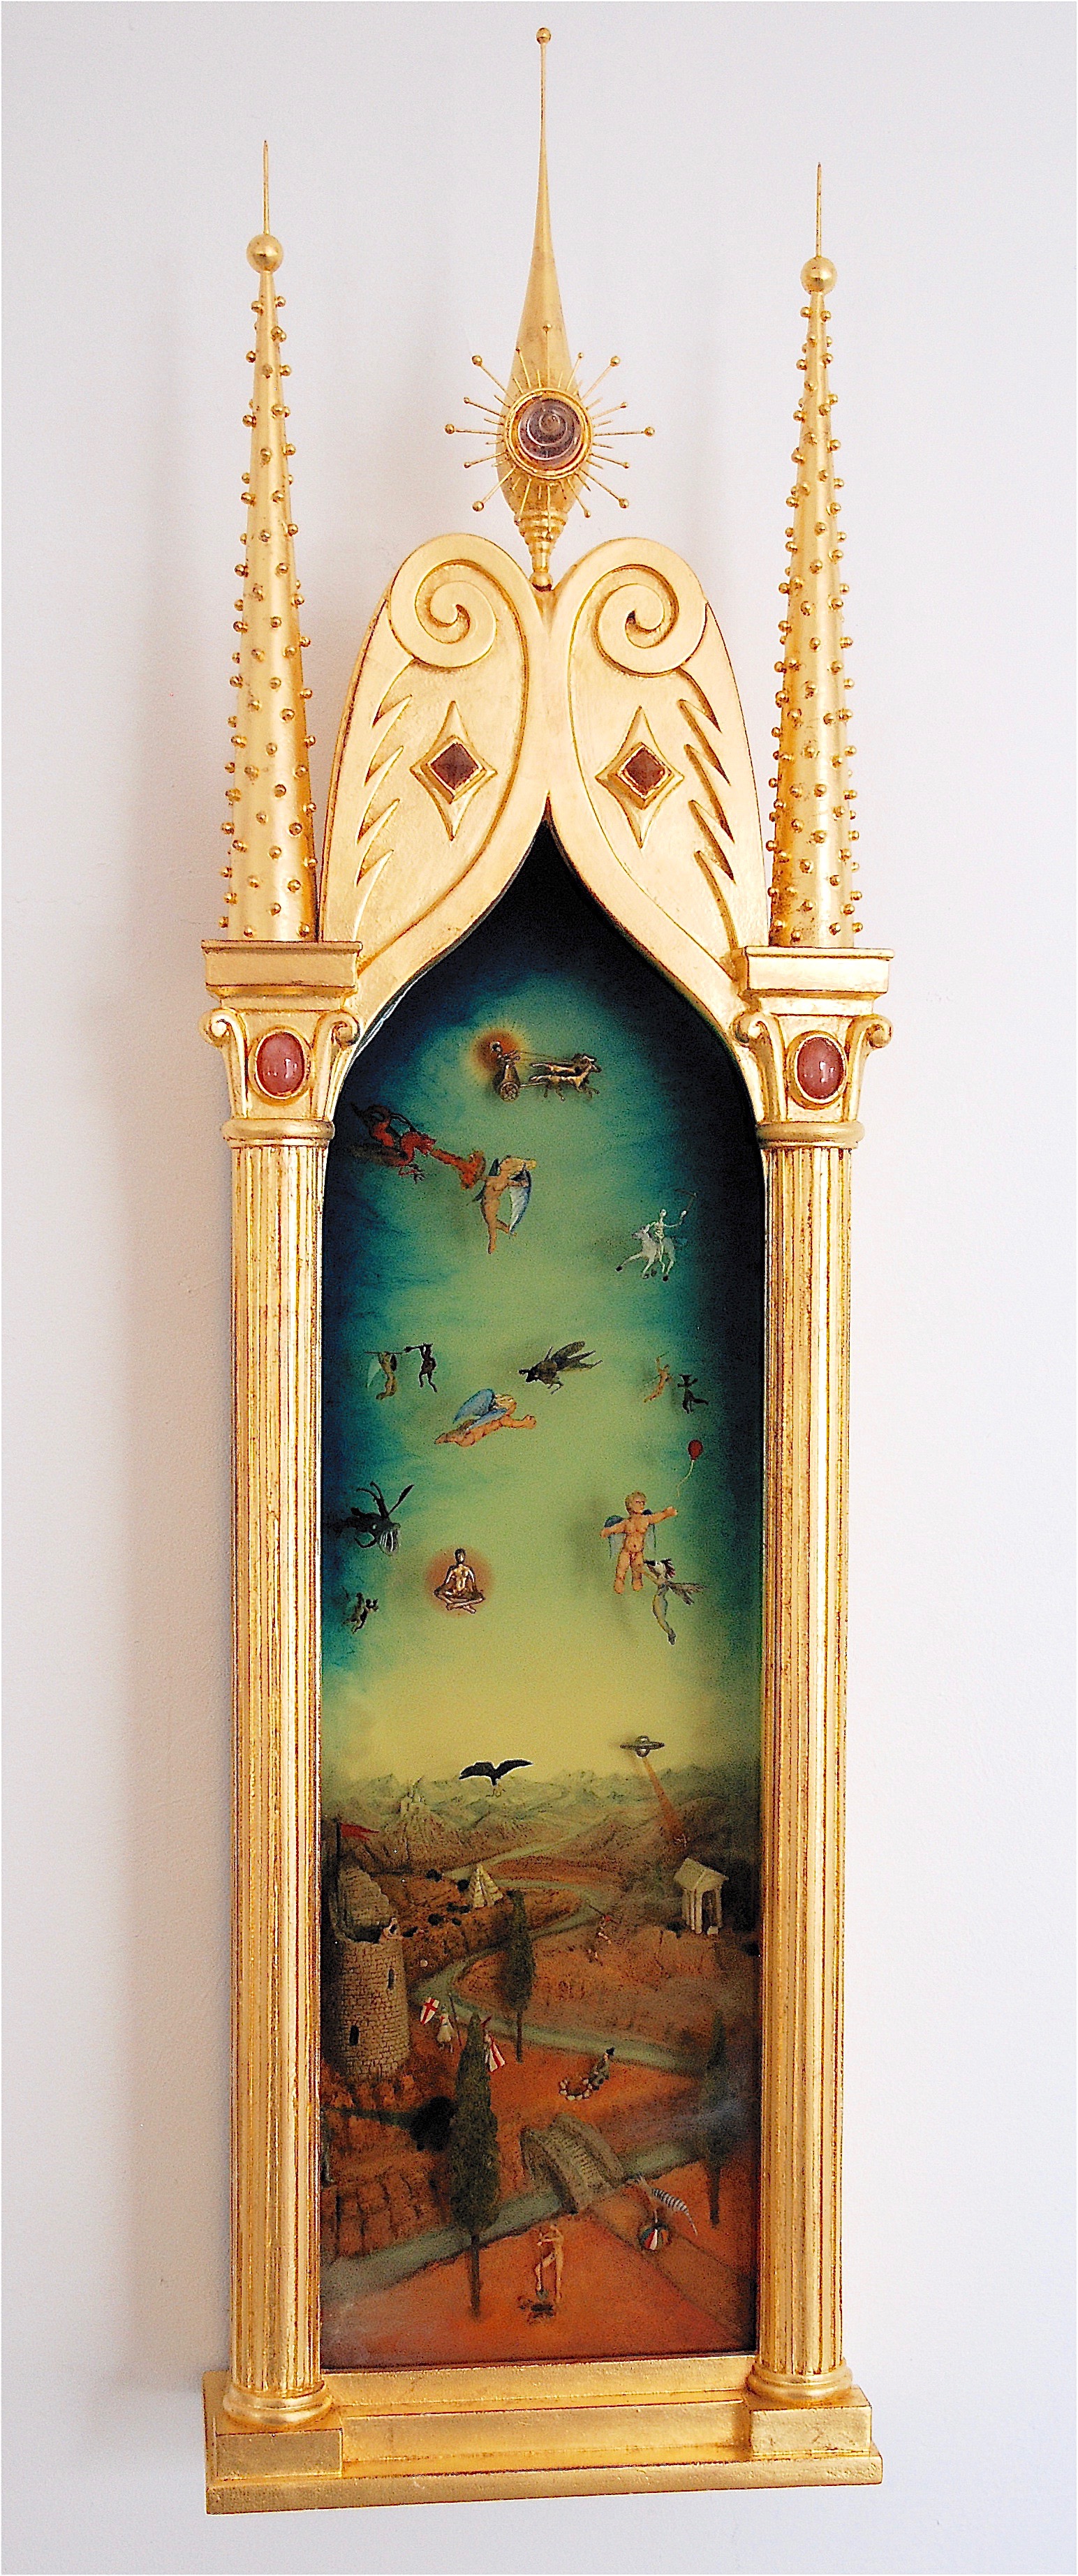 Thomas Coffin - Battle Between Good and the Extremely Annoying, 42"h x 12"w x 5"d, mixed media 3-d diorama encased in acrylic resin, handmade wood frame, 23 kt. gold leaf